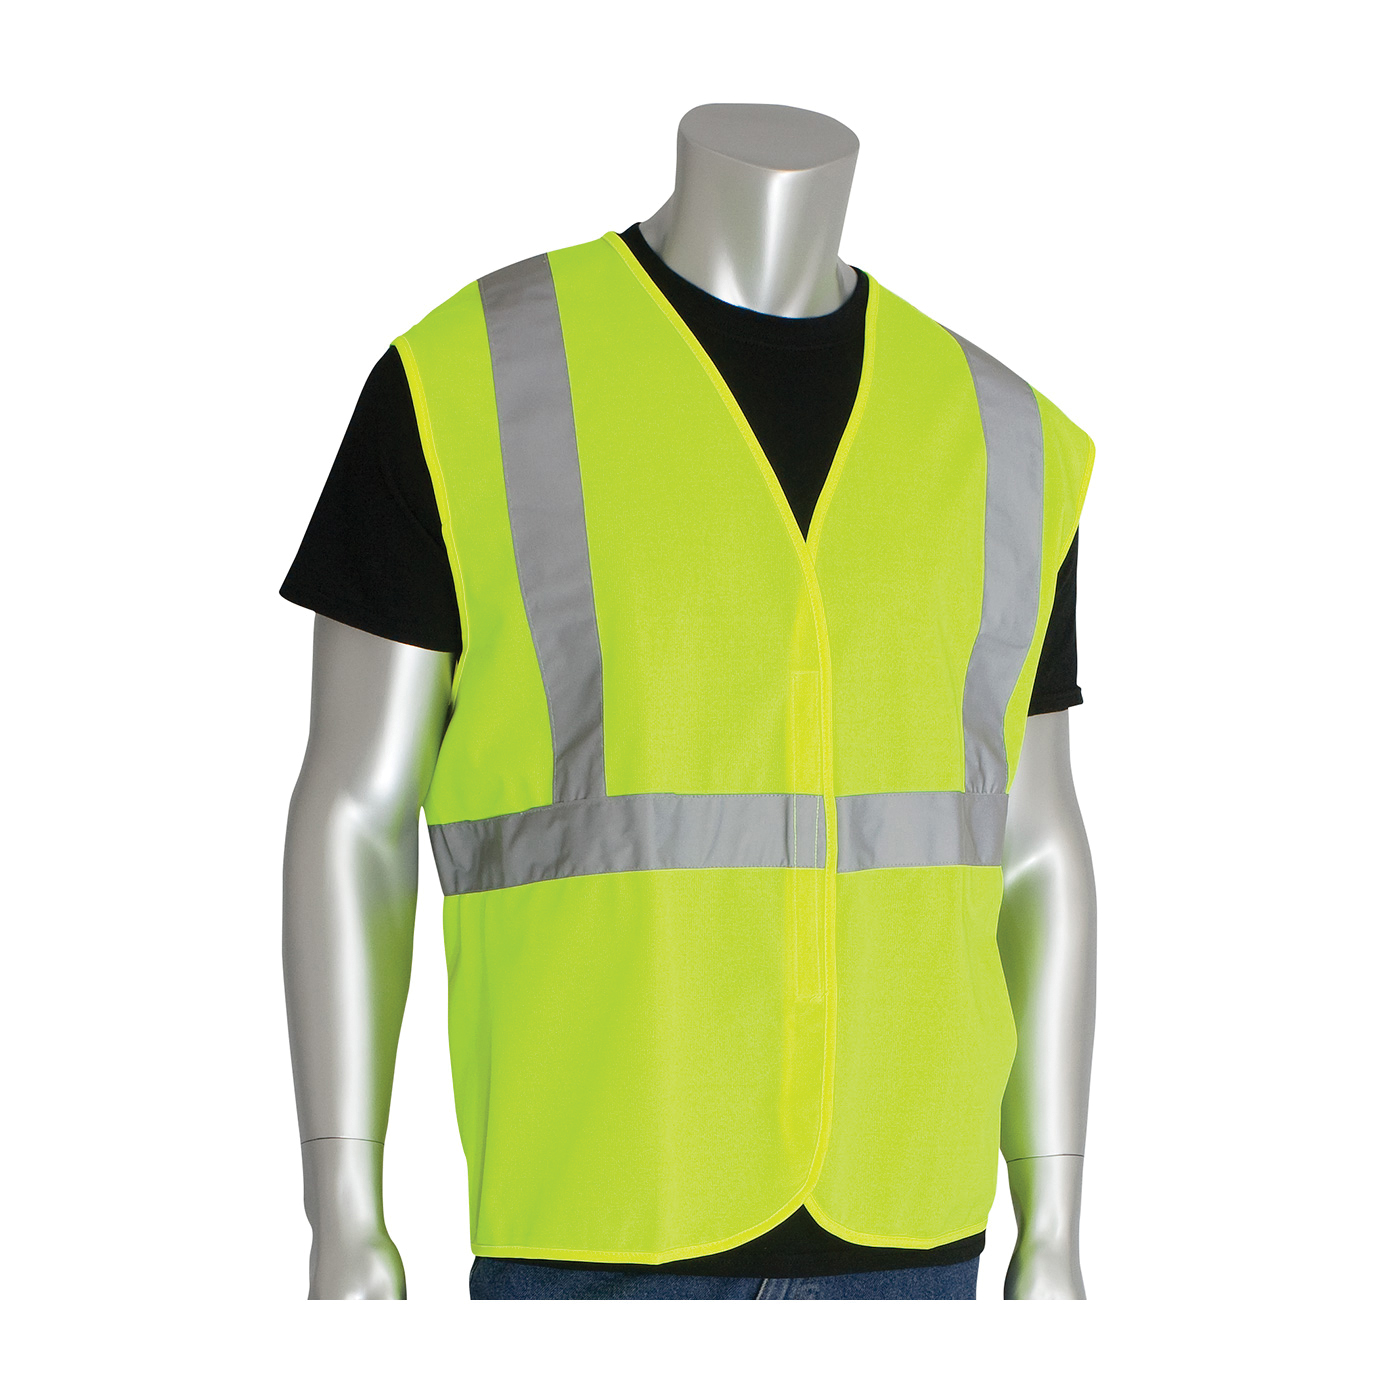 PIP® 302-WCENGLY-M Solid Vest, M, Hi-Viz Lime Yellow, Polyester, Hook and Loop Closure, ANSI Class: Class 2, Specifications Met: ANSI 107 Type R